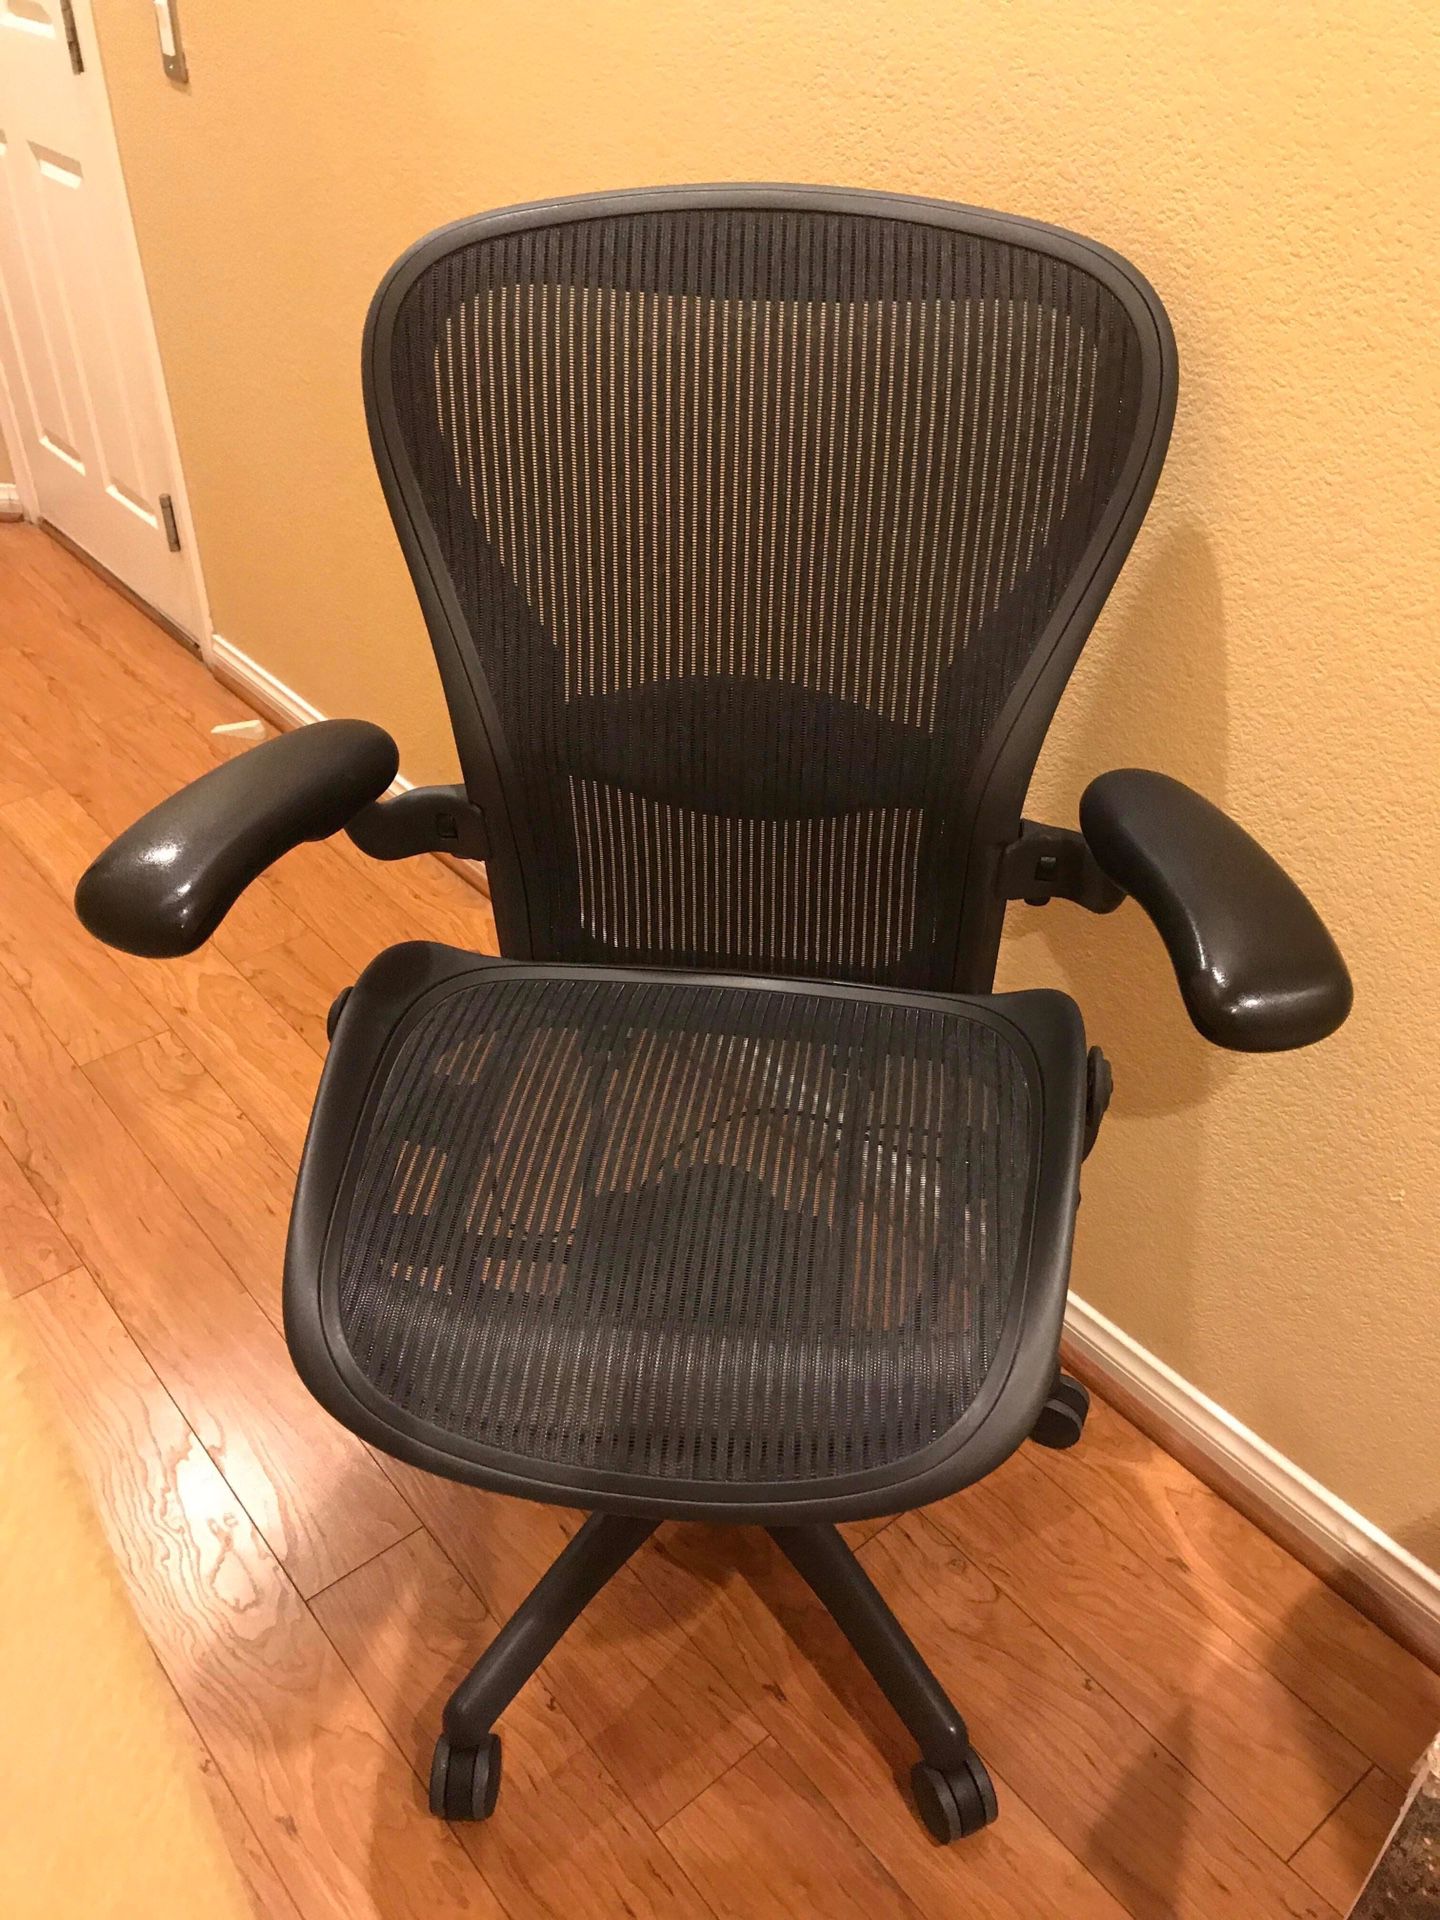 Aeron Herman Miller office chair Size C fully loaded